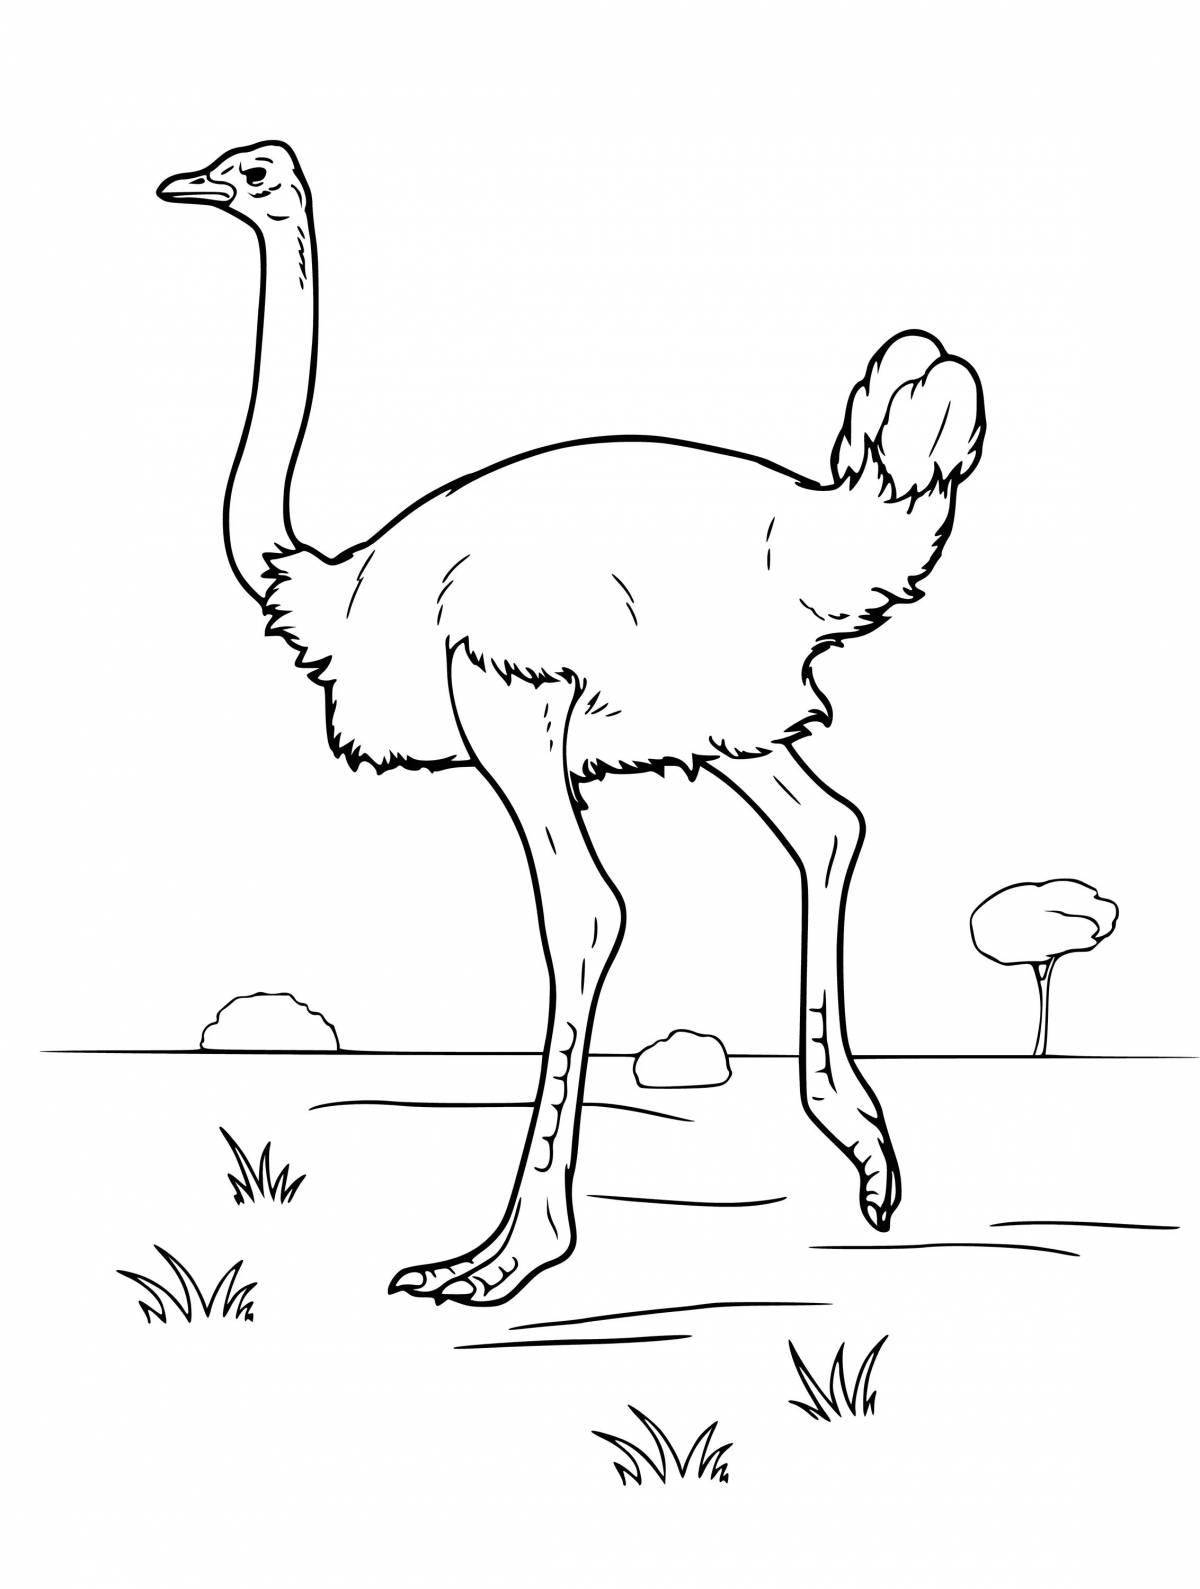 Cute ostrich coloring pages for kids